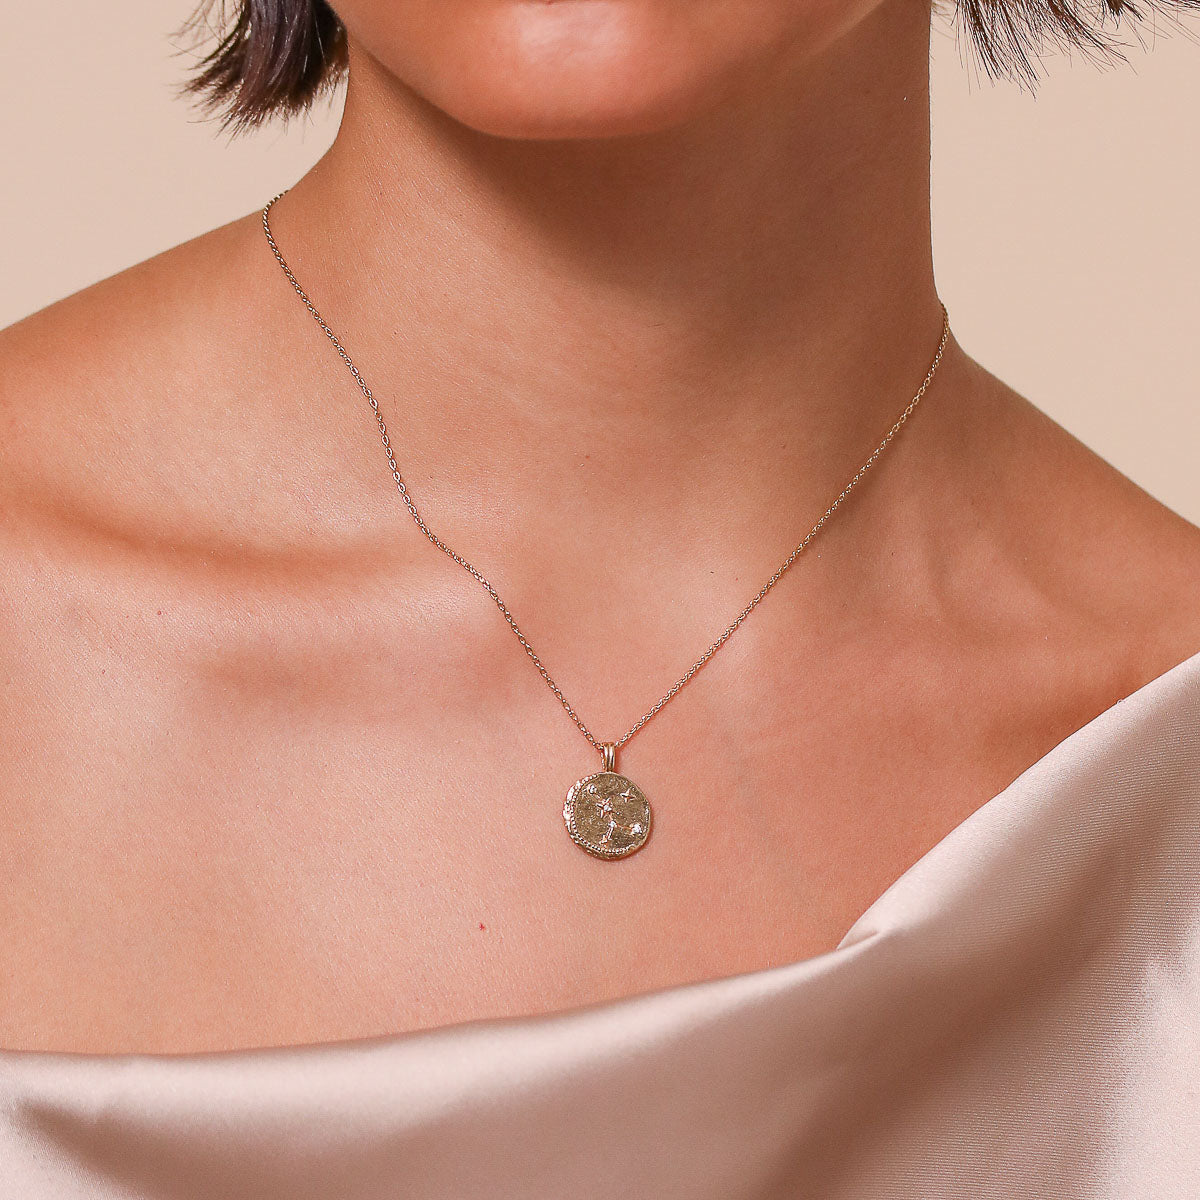 Cancer Zodiac Pendant Necklace in Gold worn